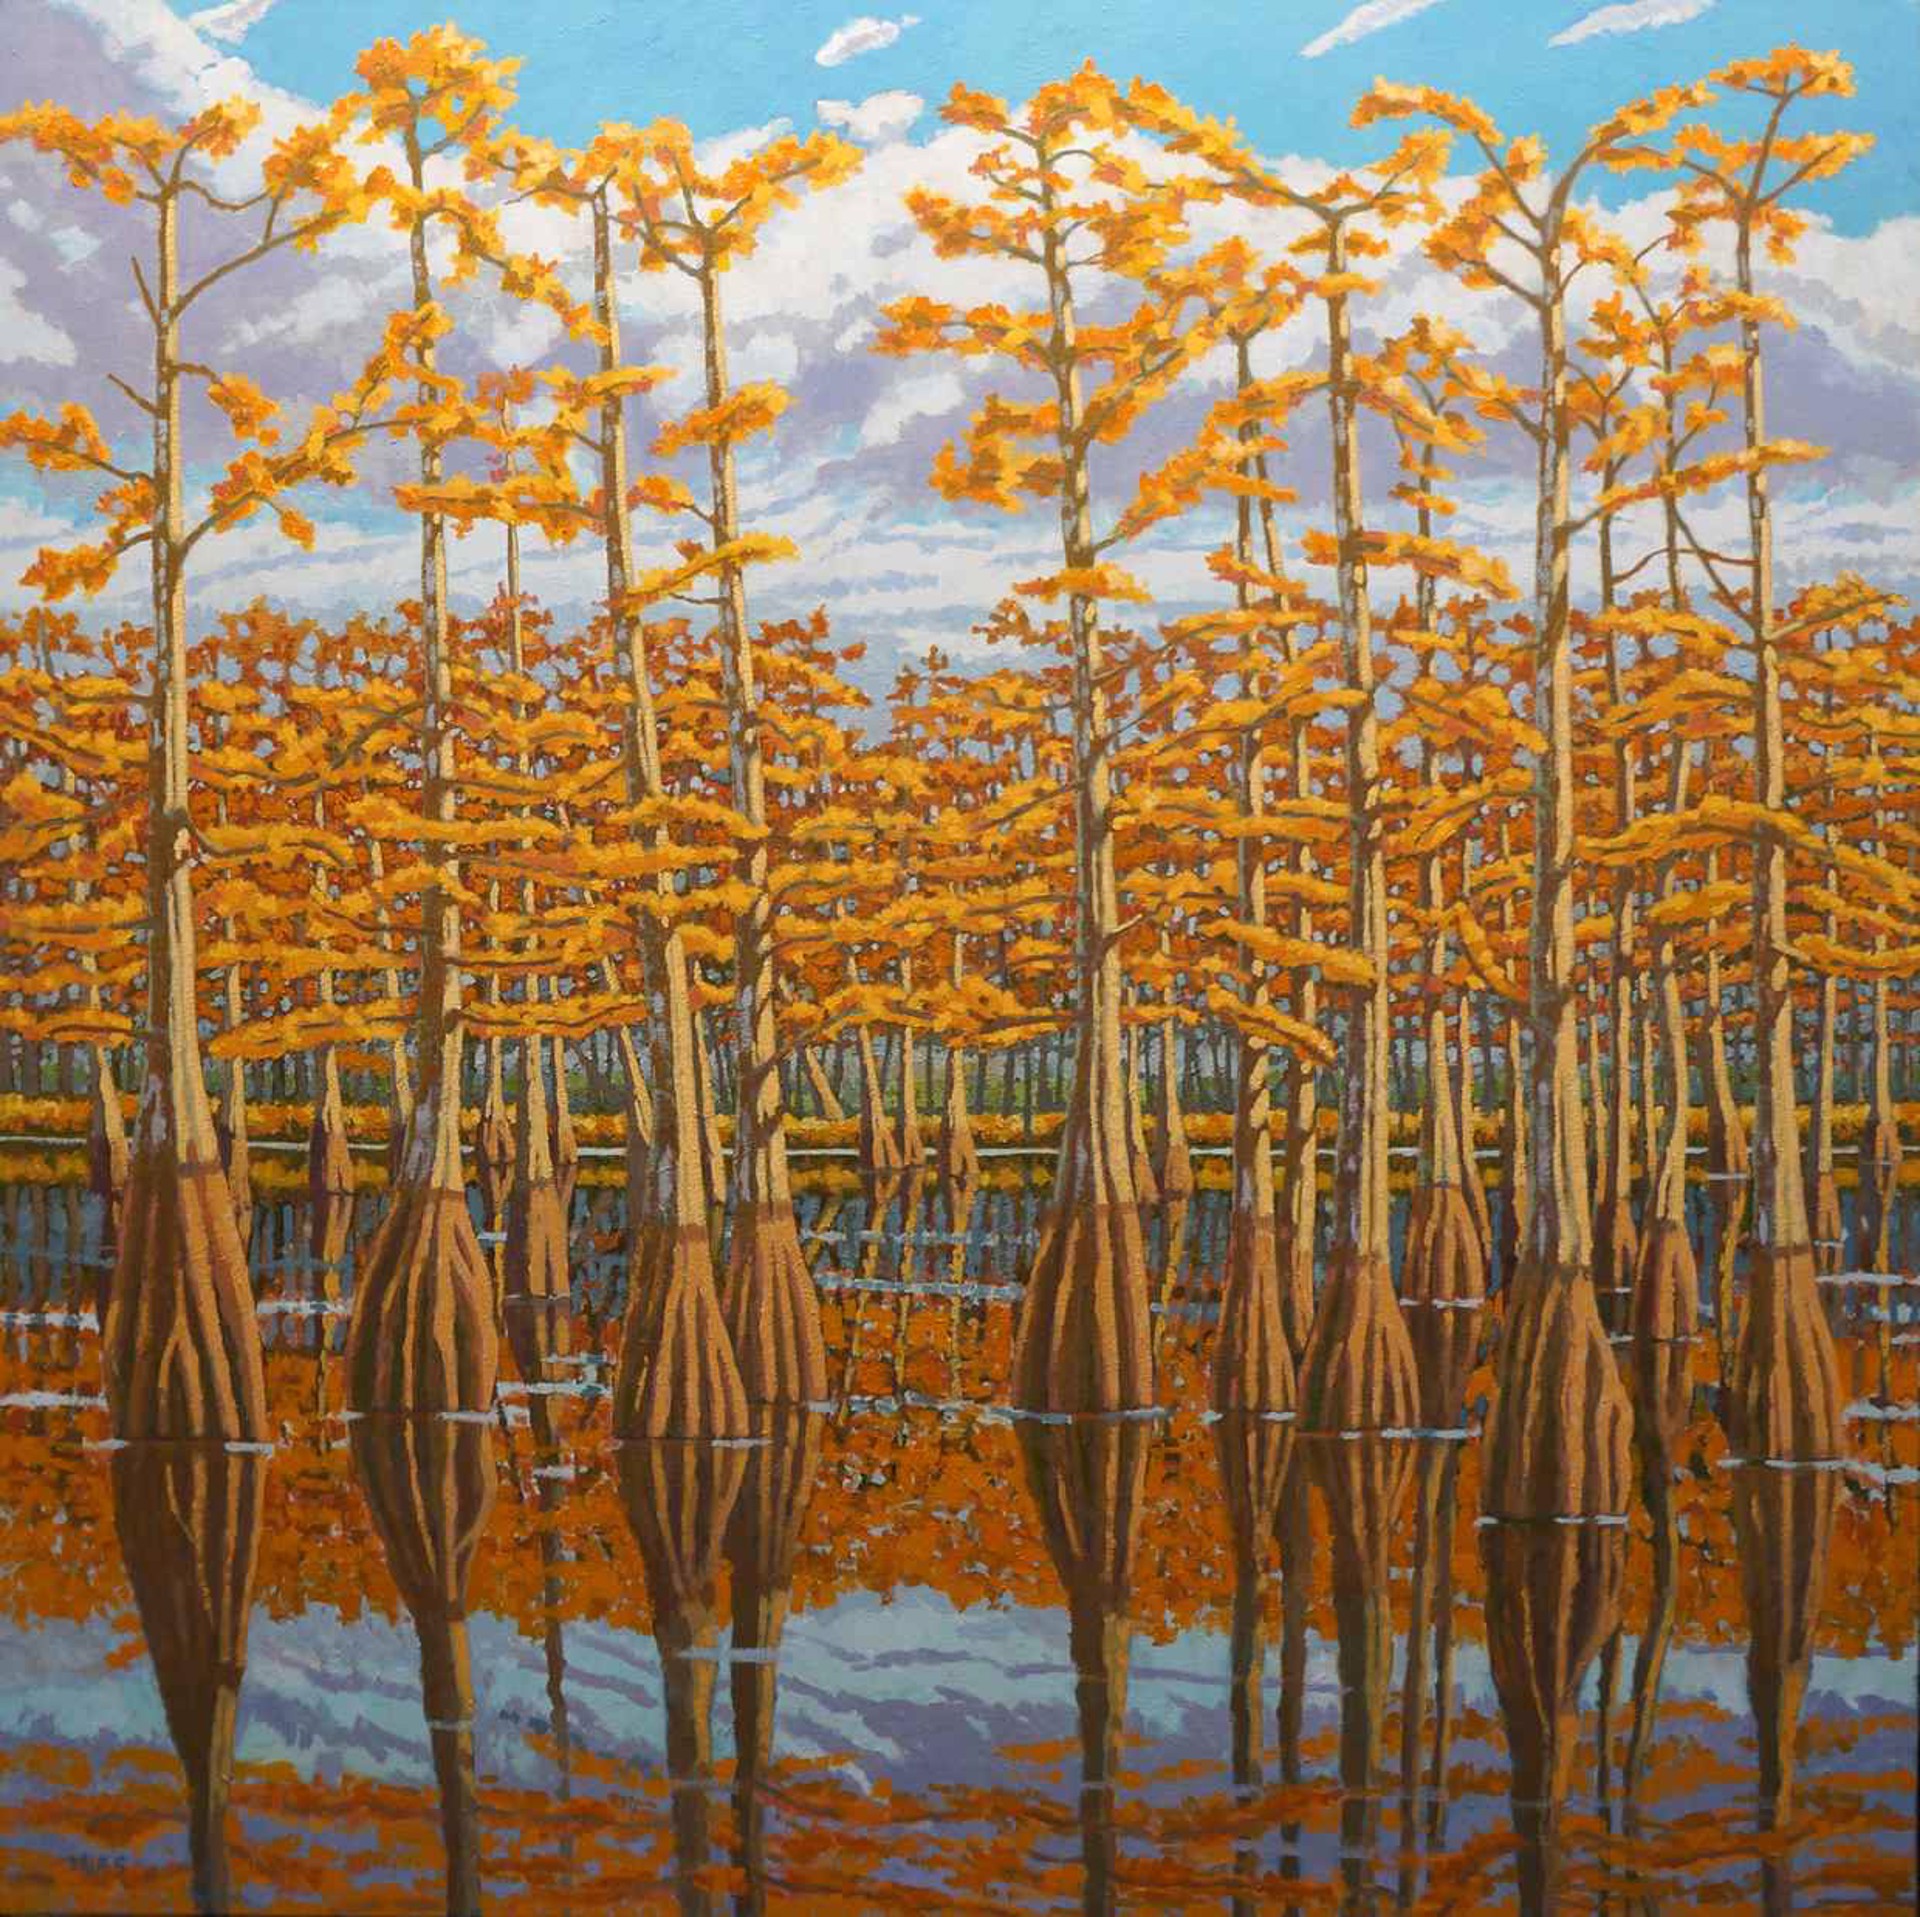 Stand of Bald Cypress by Bill Iles